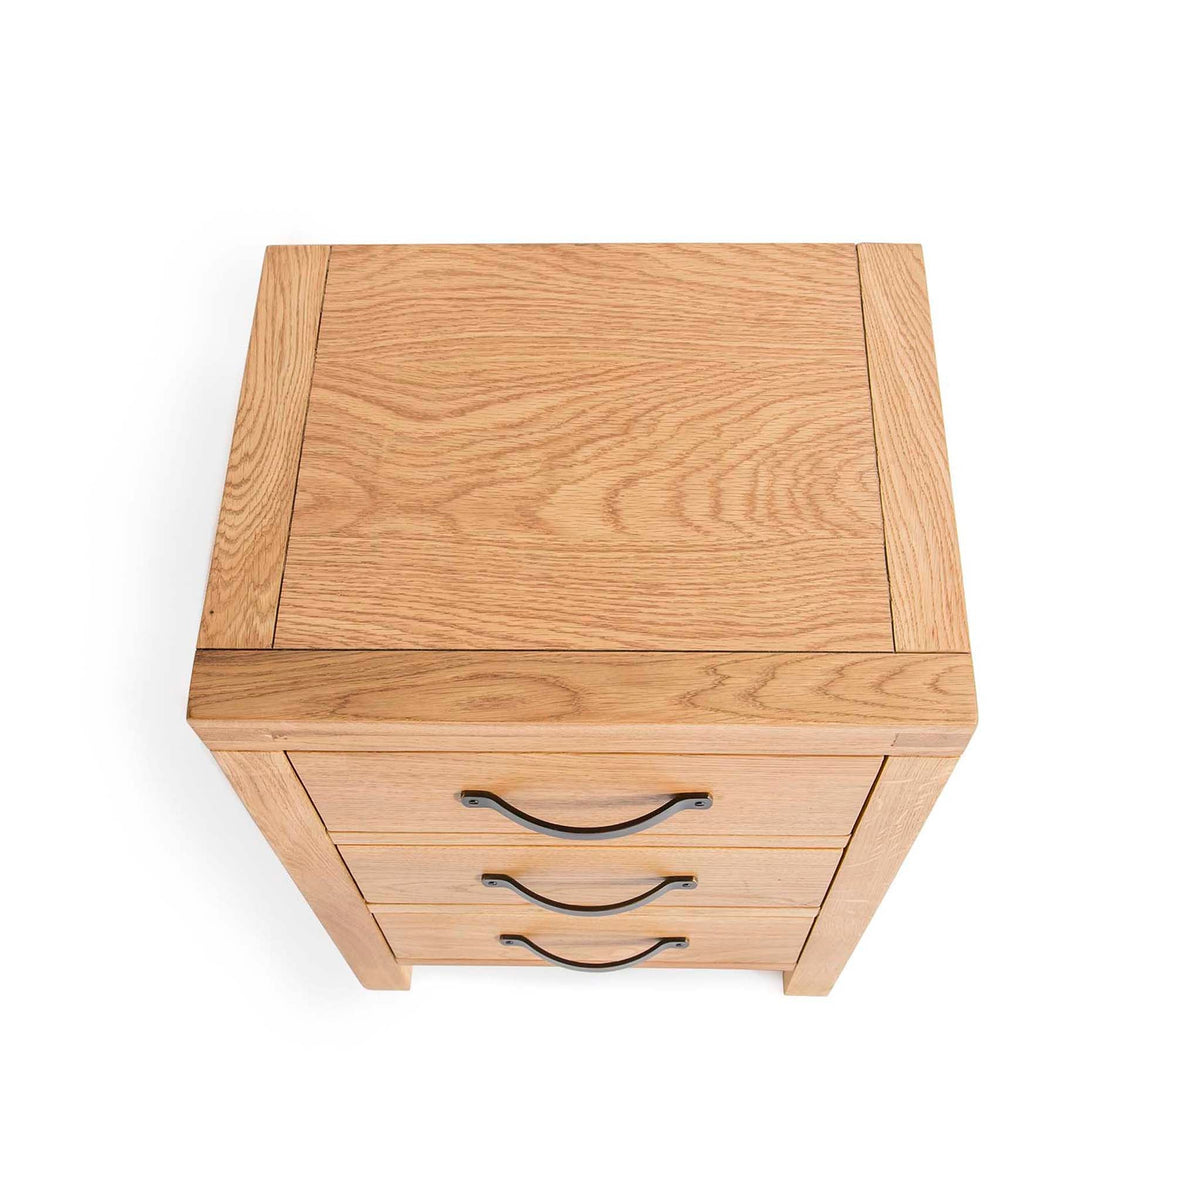 Abbey Waxed 3 Drawer Small Oak Bedside Table by Roseland Furniture - Looking down on bedside chest